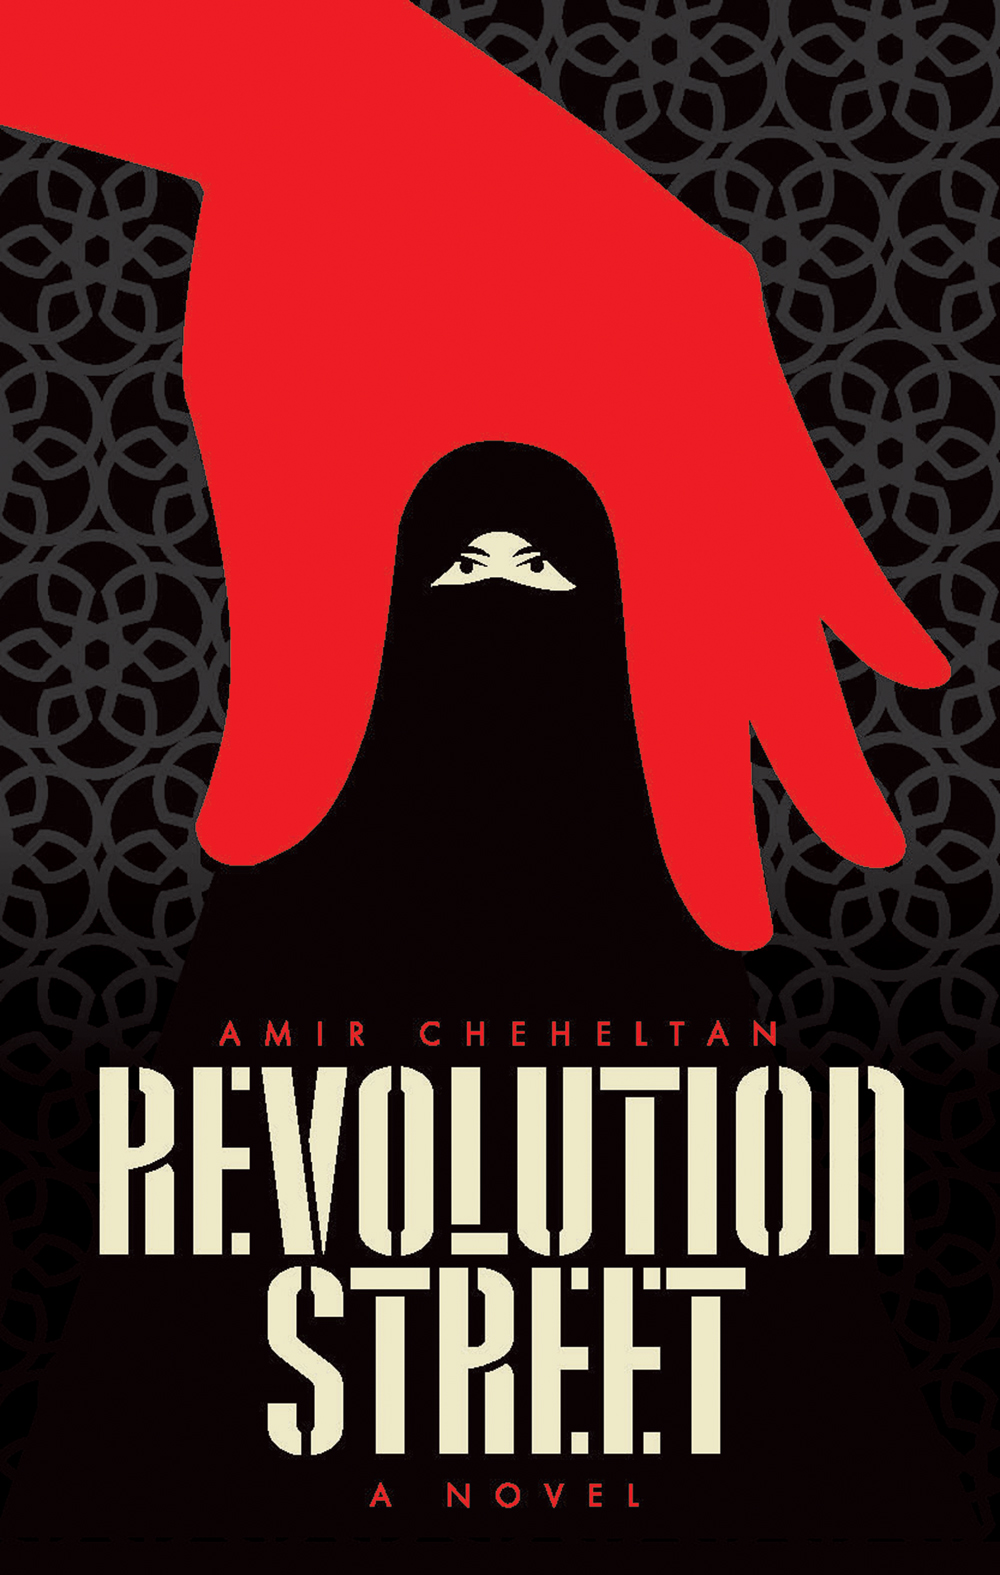 "Revolution Street" by Amir Hassan Cheheltan (published by One World Publications)